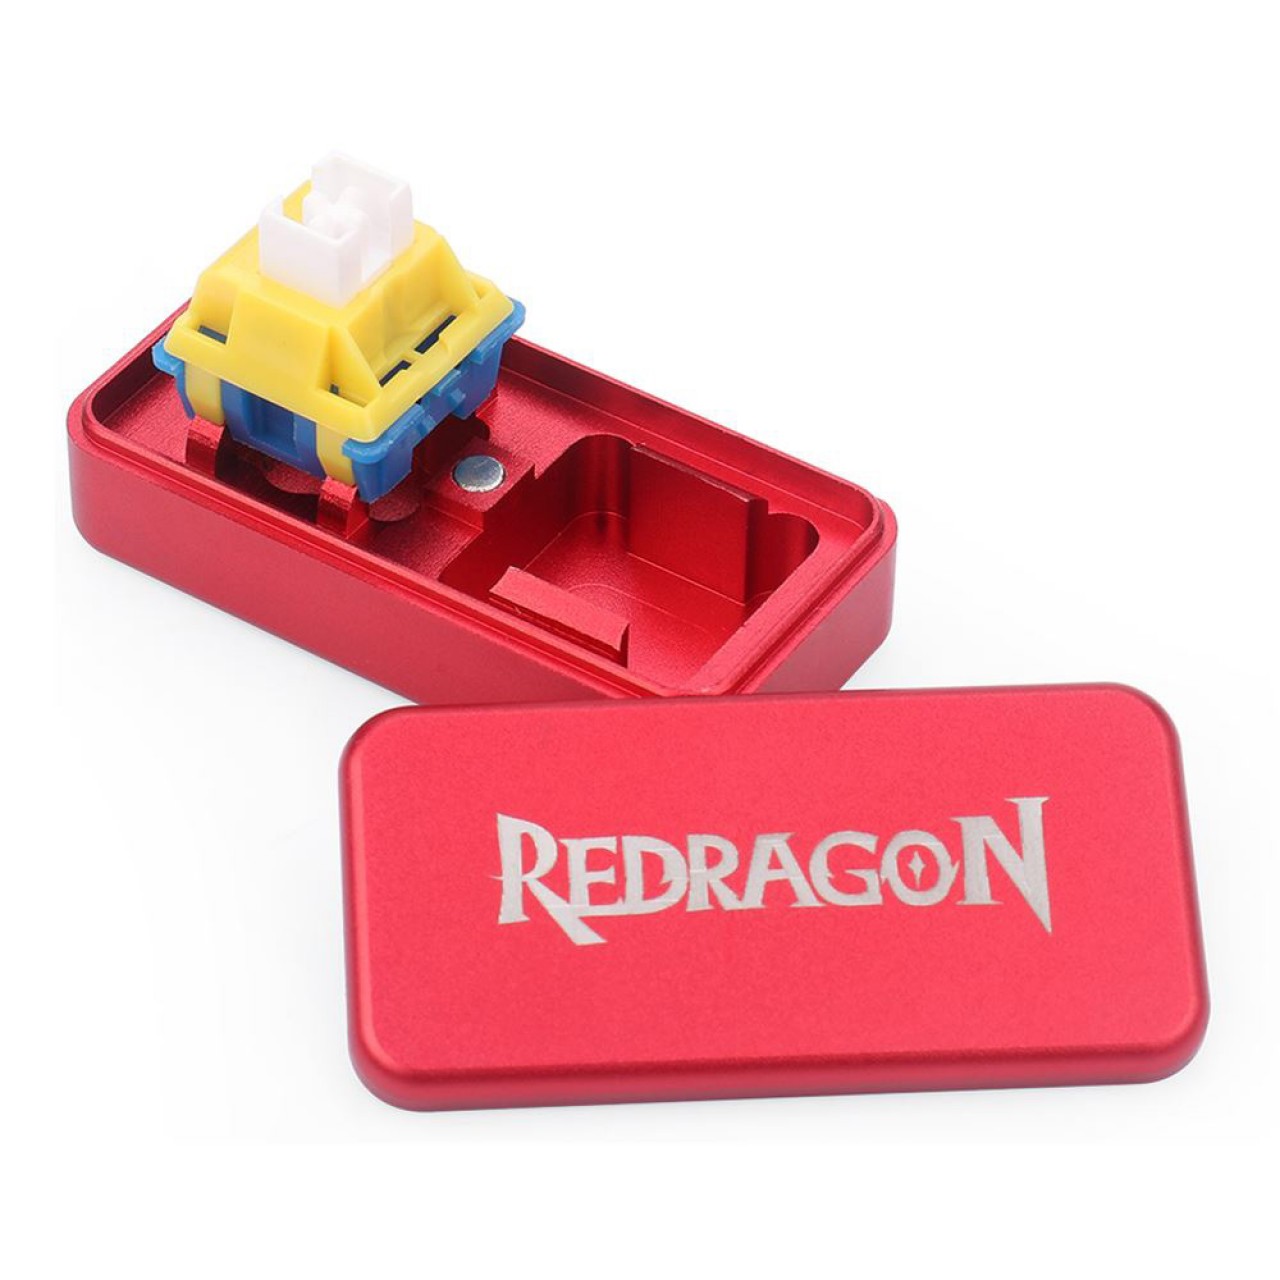 Gaming Αξεσουάρ - Redragon A116 Aluminium 2 in 1 Magnetic Switch Opener